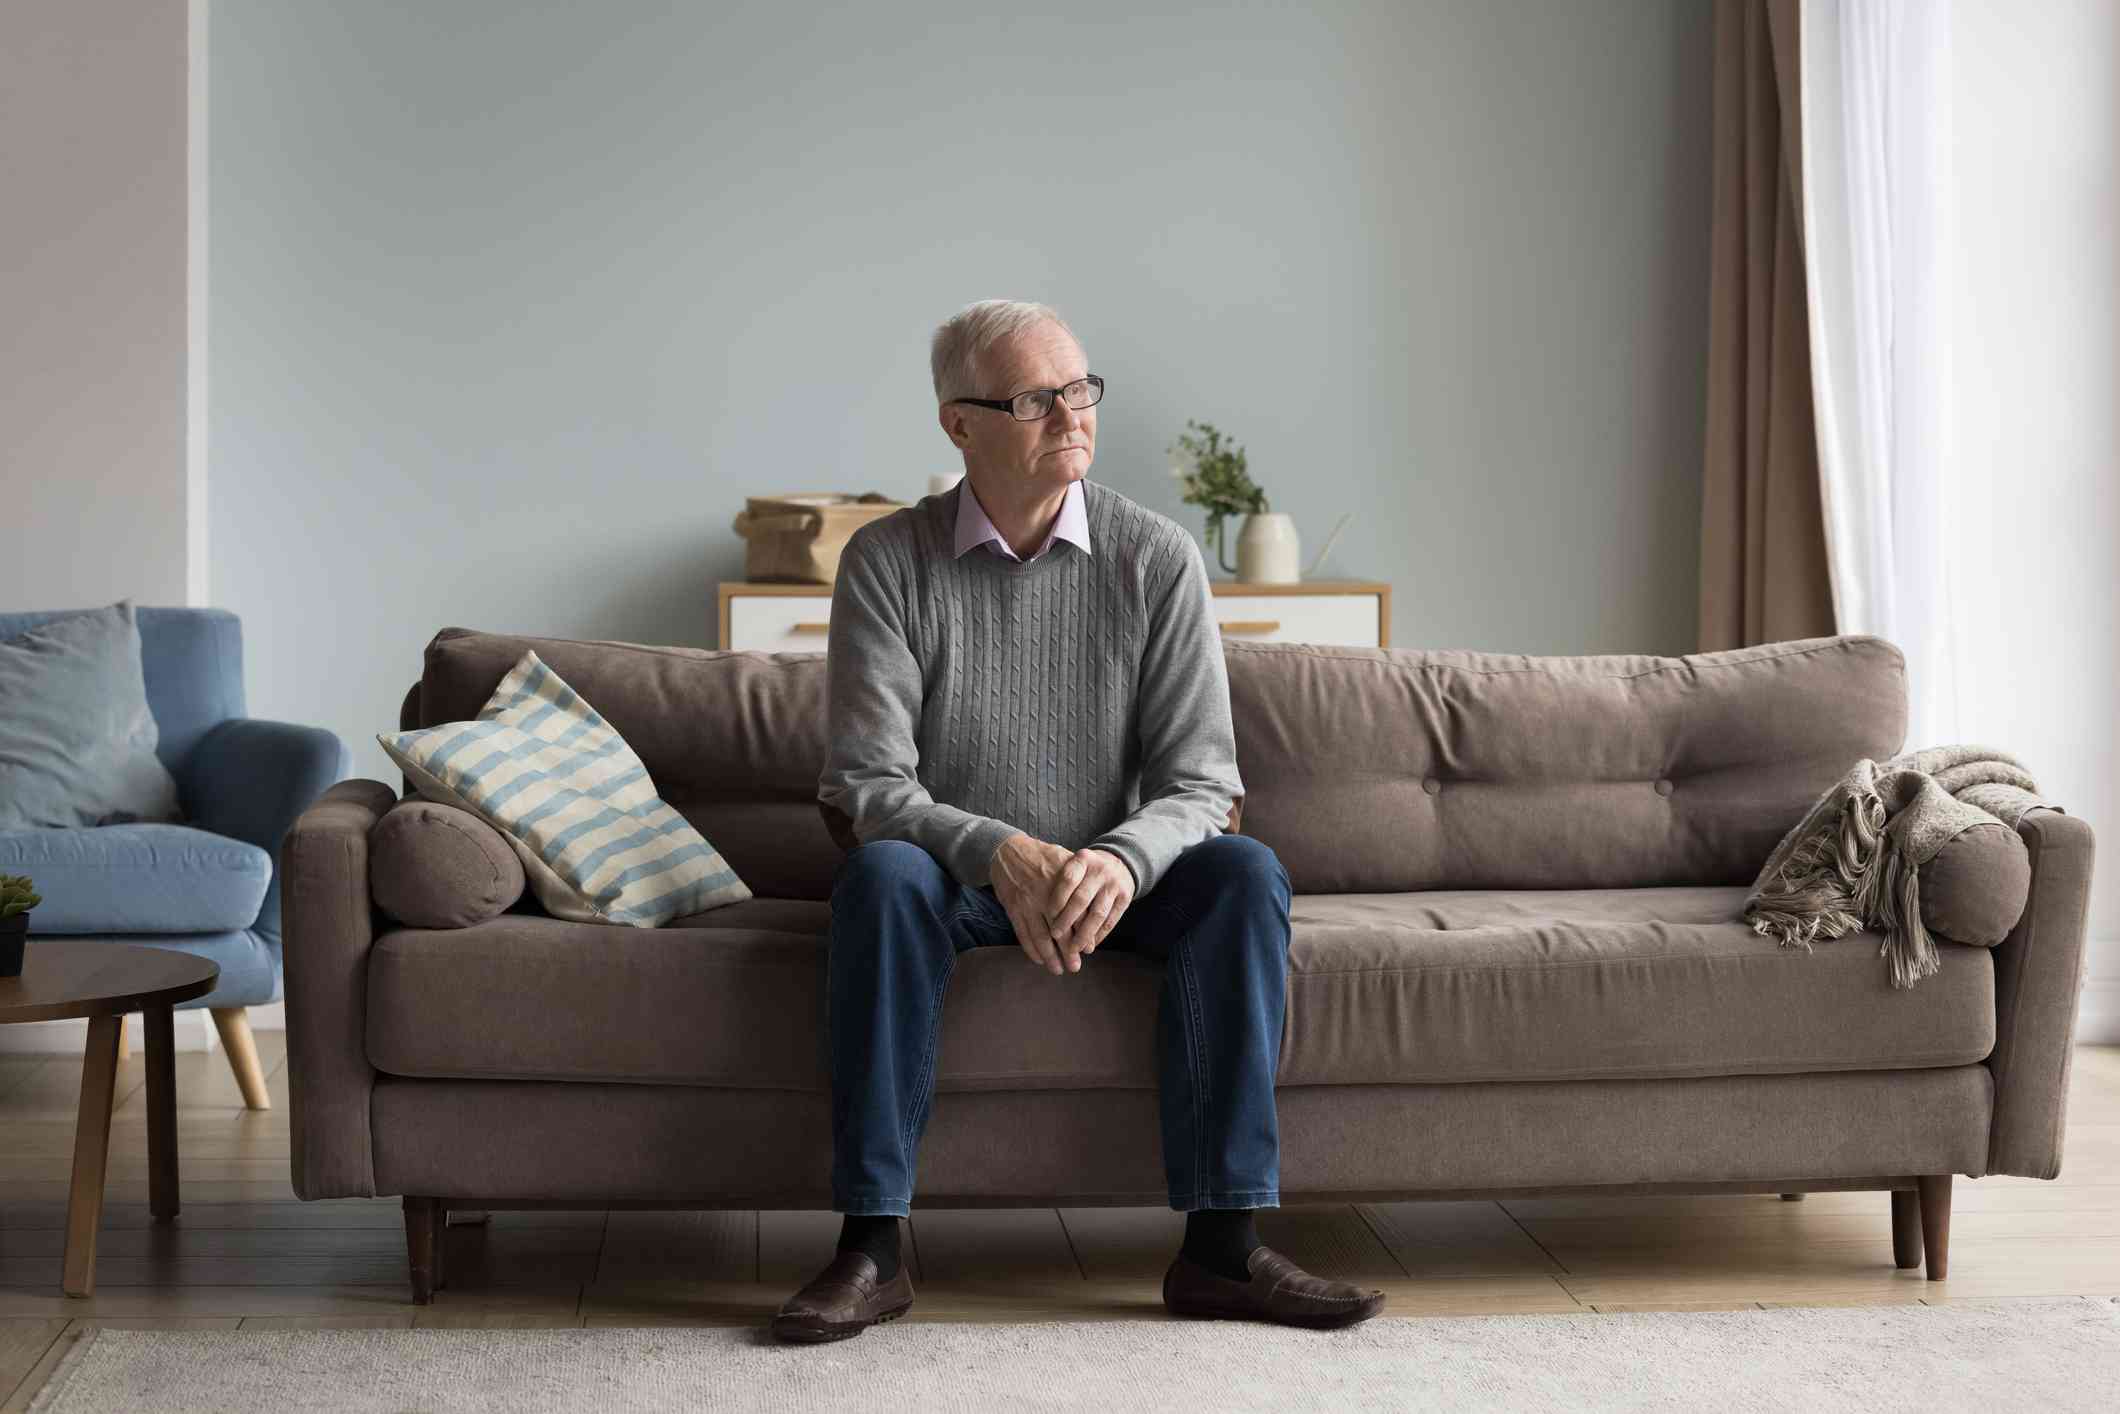 A middle aged male therapist with glasses sit on the couch and gazes off with a sad expression.